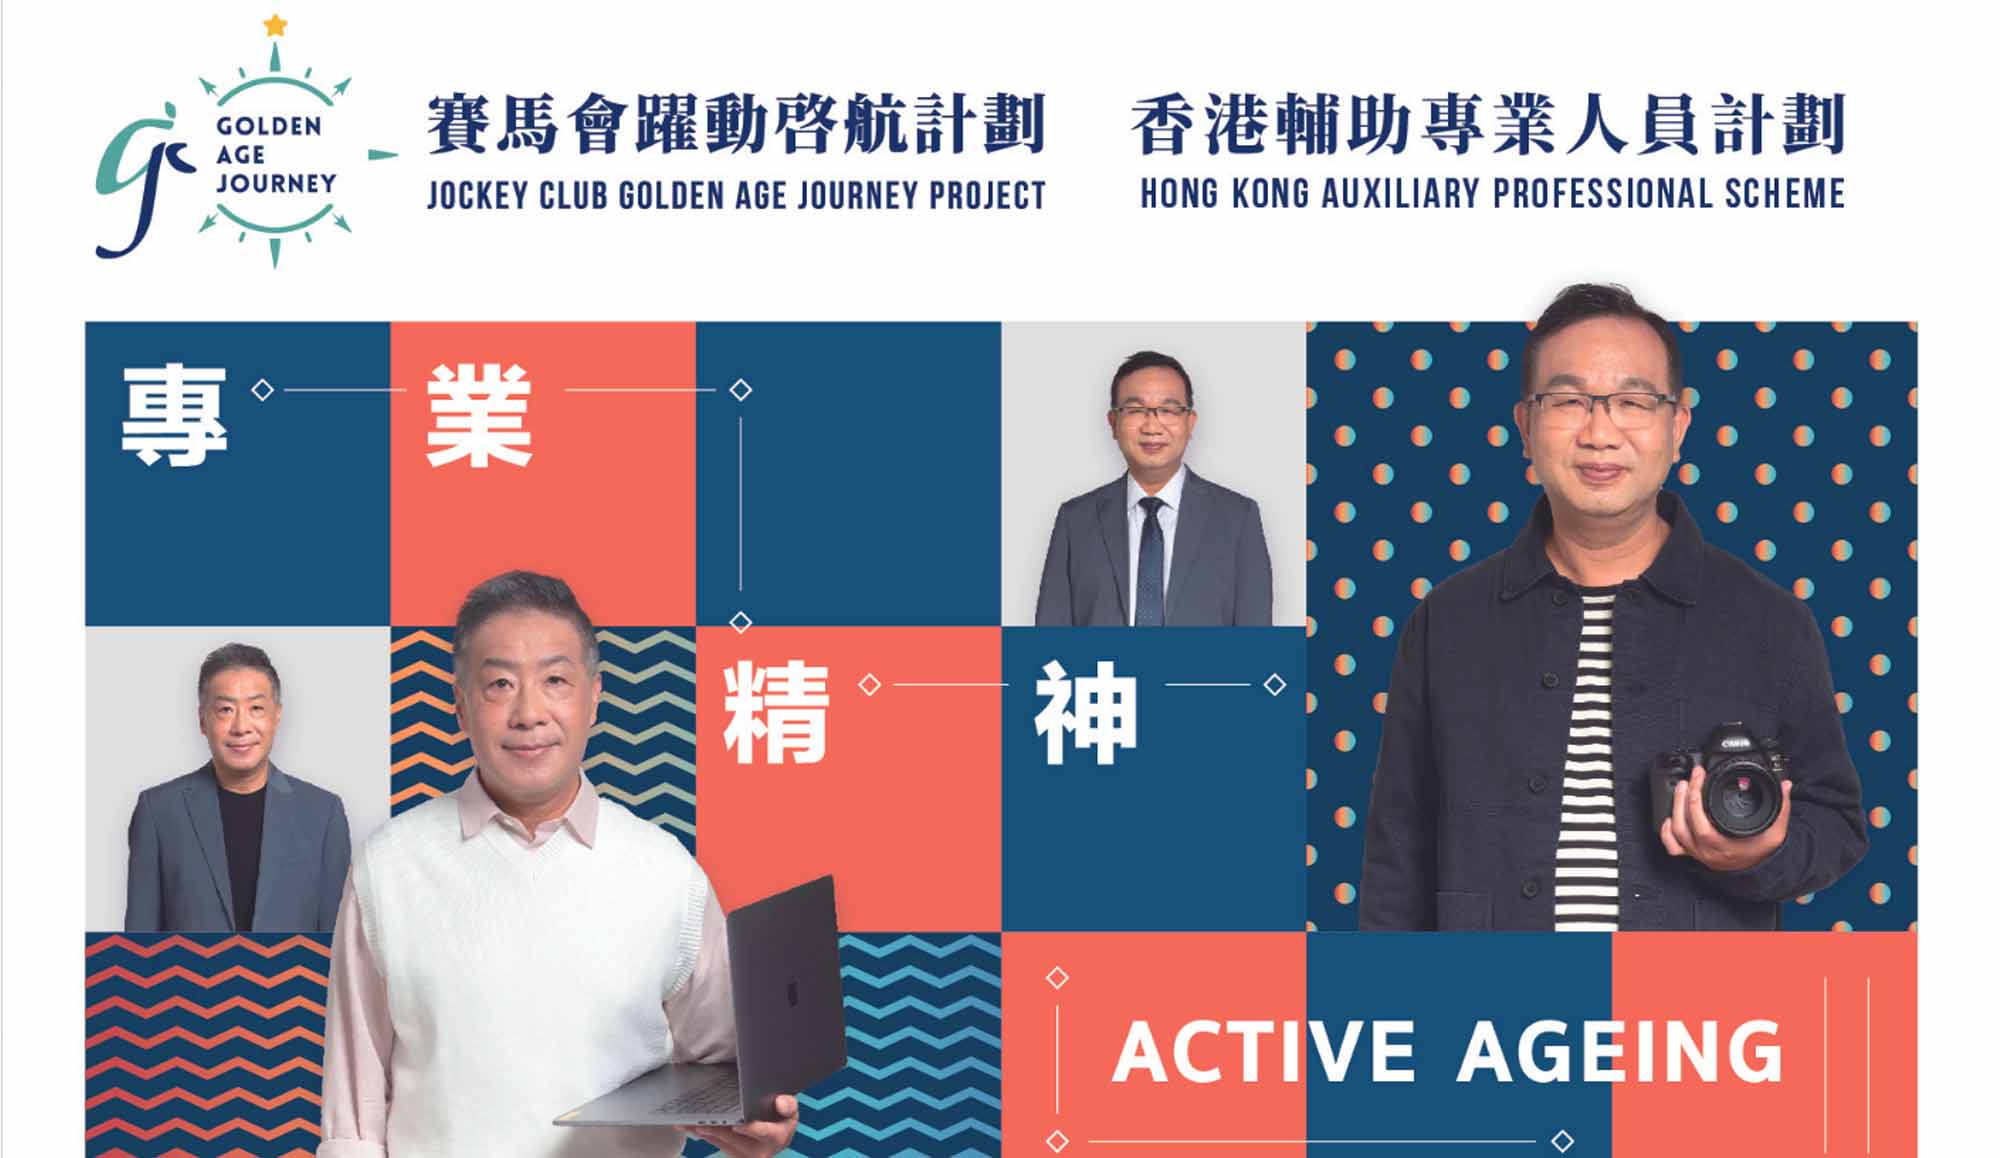 Jockey Club Golden Age Journey Project - Hong Kong Auxiliary Professional Scheme 